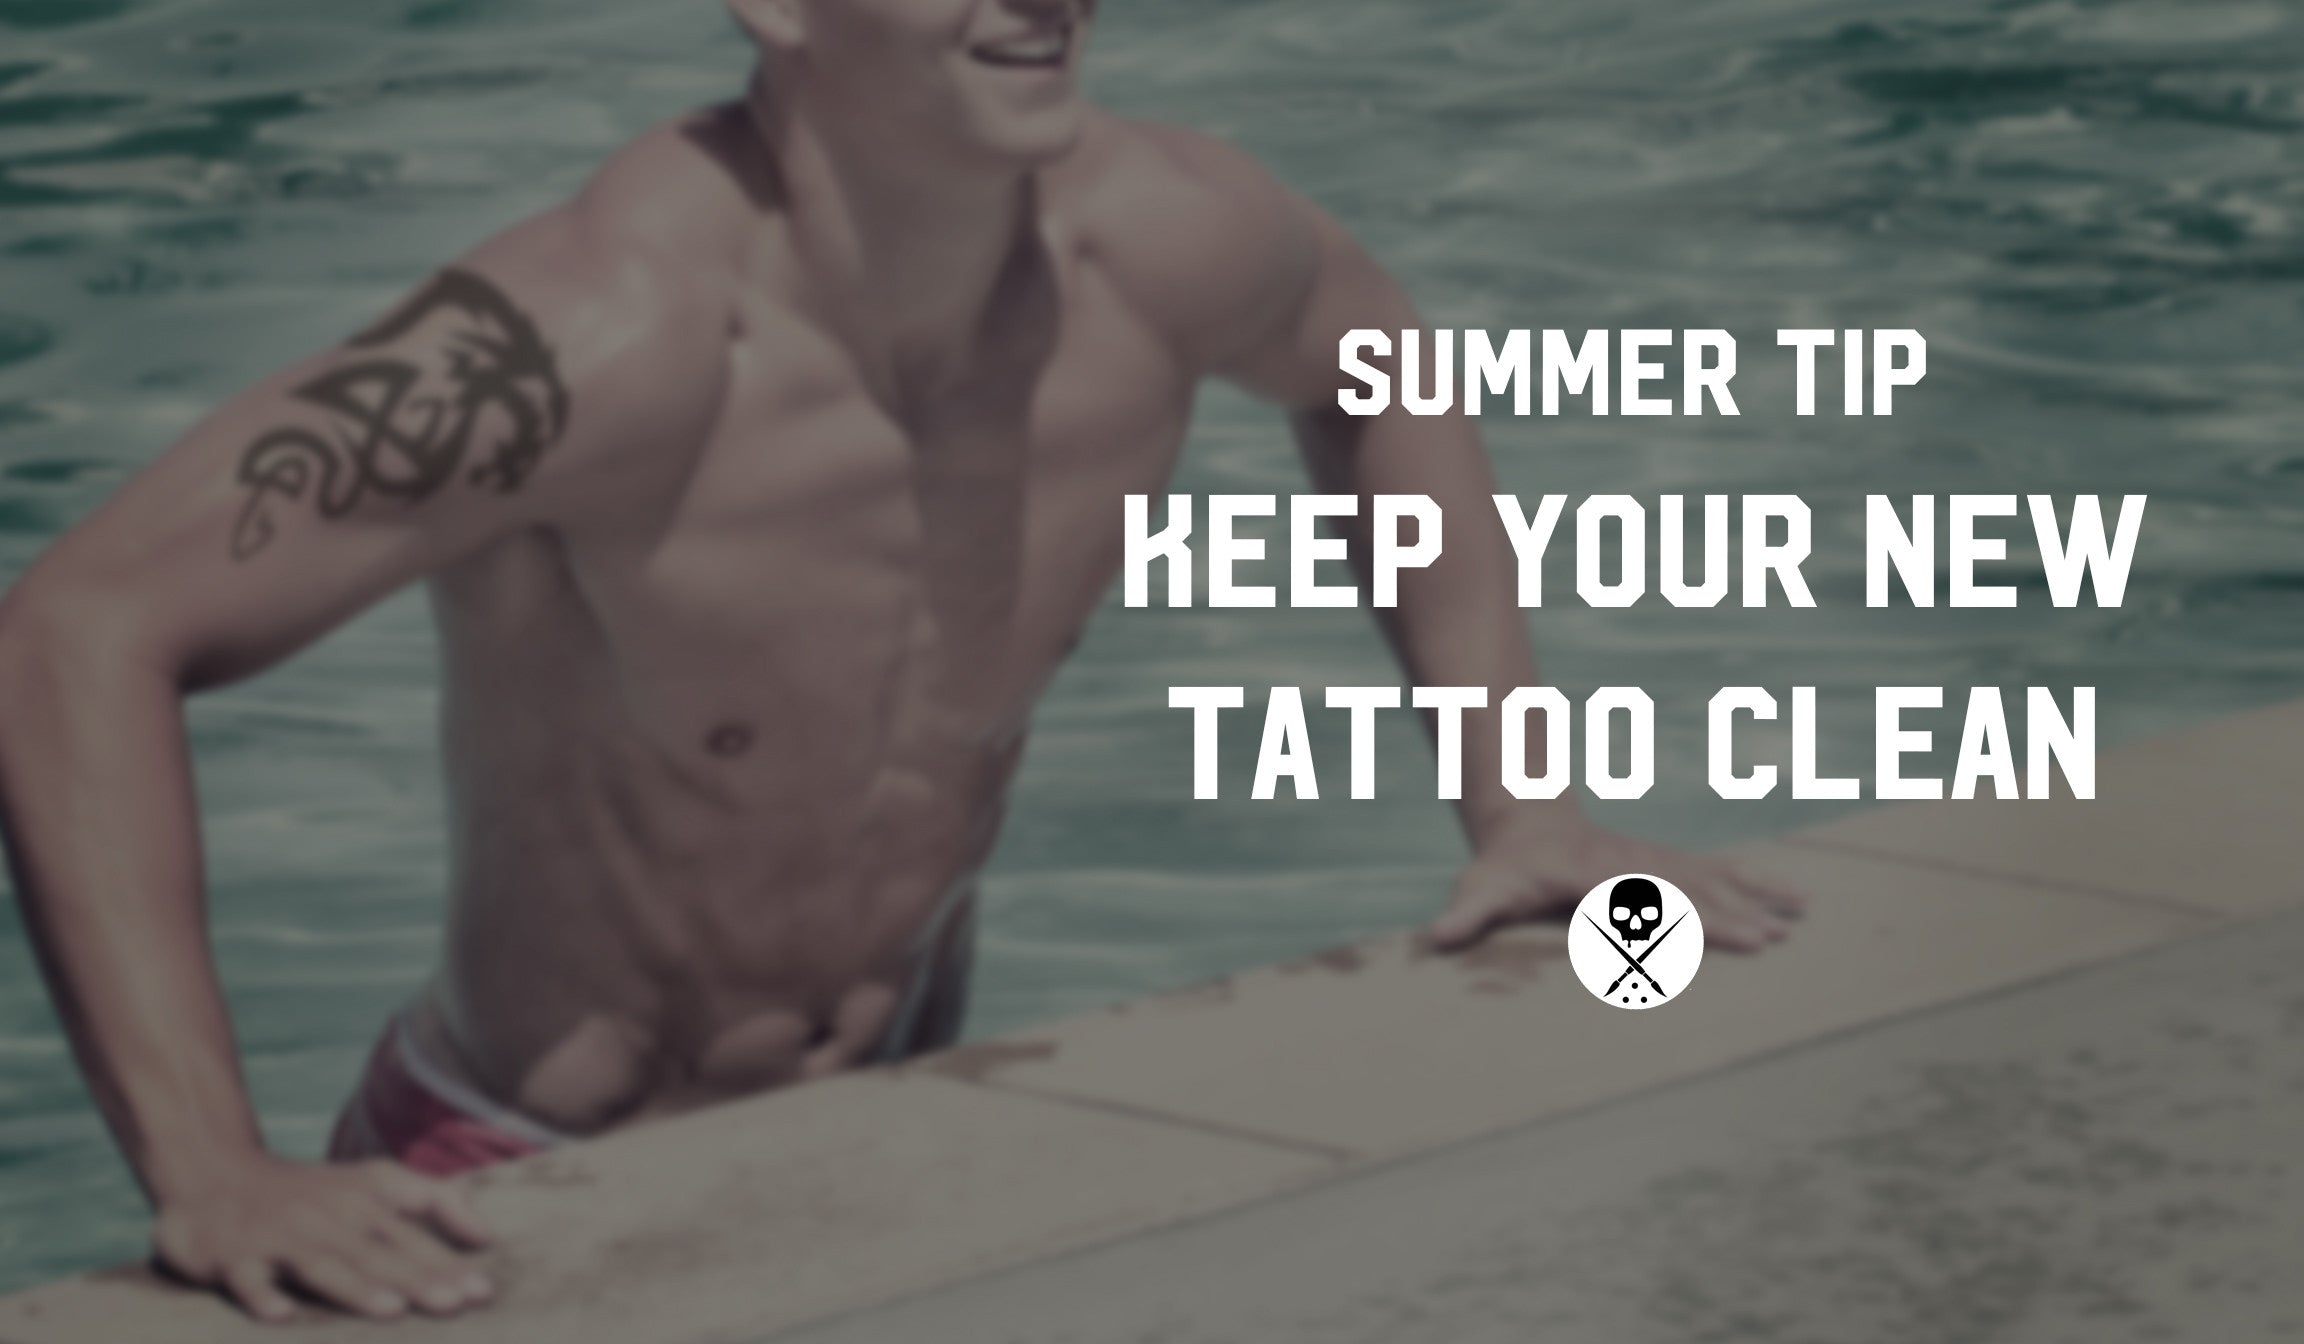 Summer Tip - Keep Your New Tattoo Clean